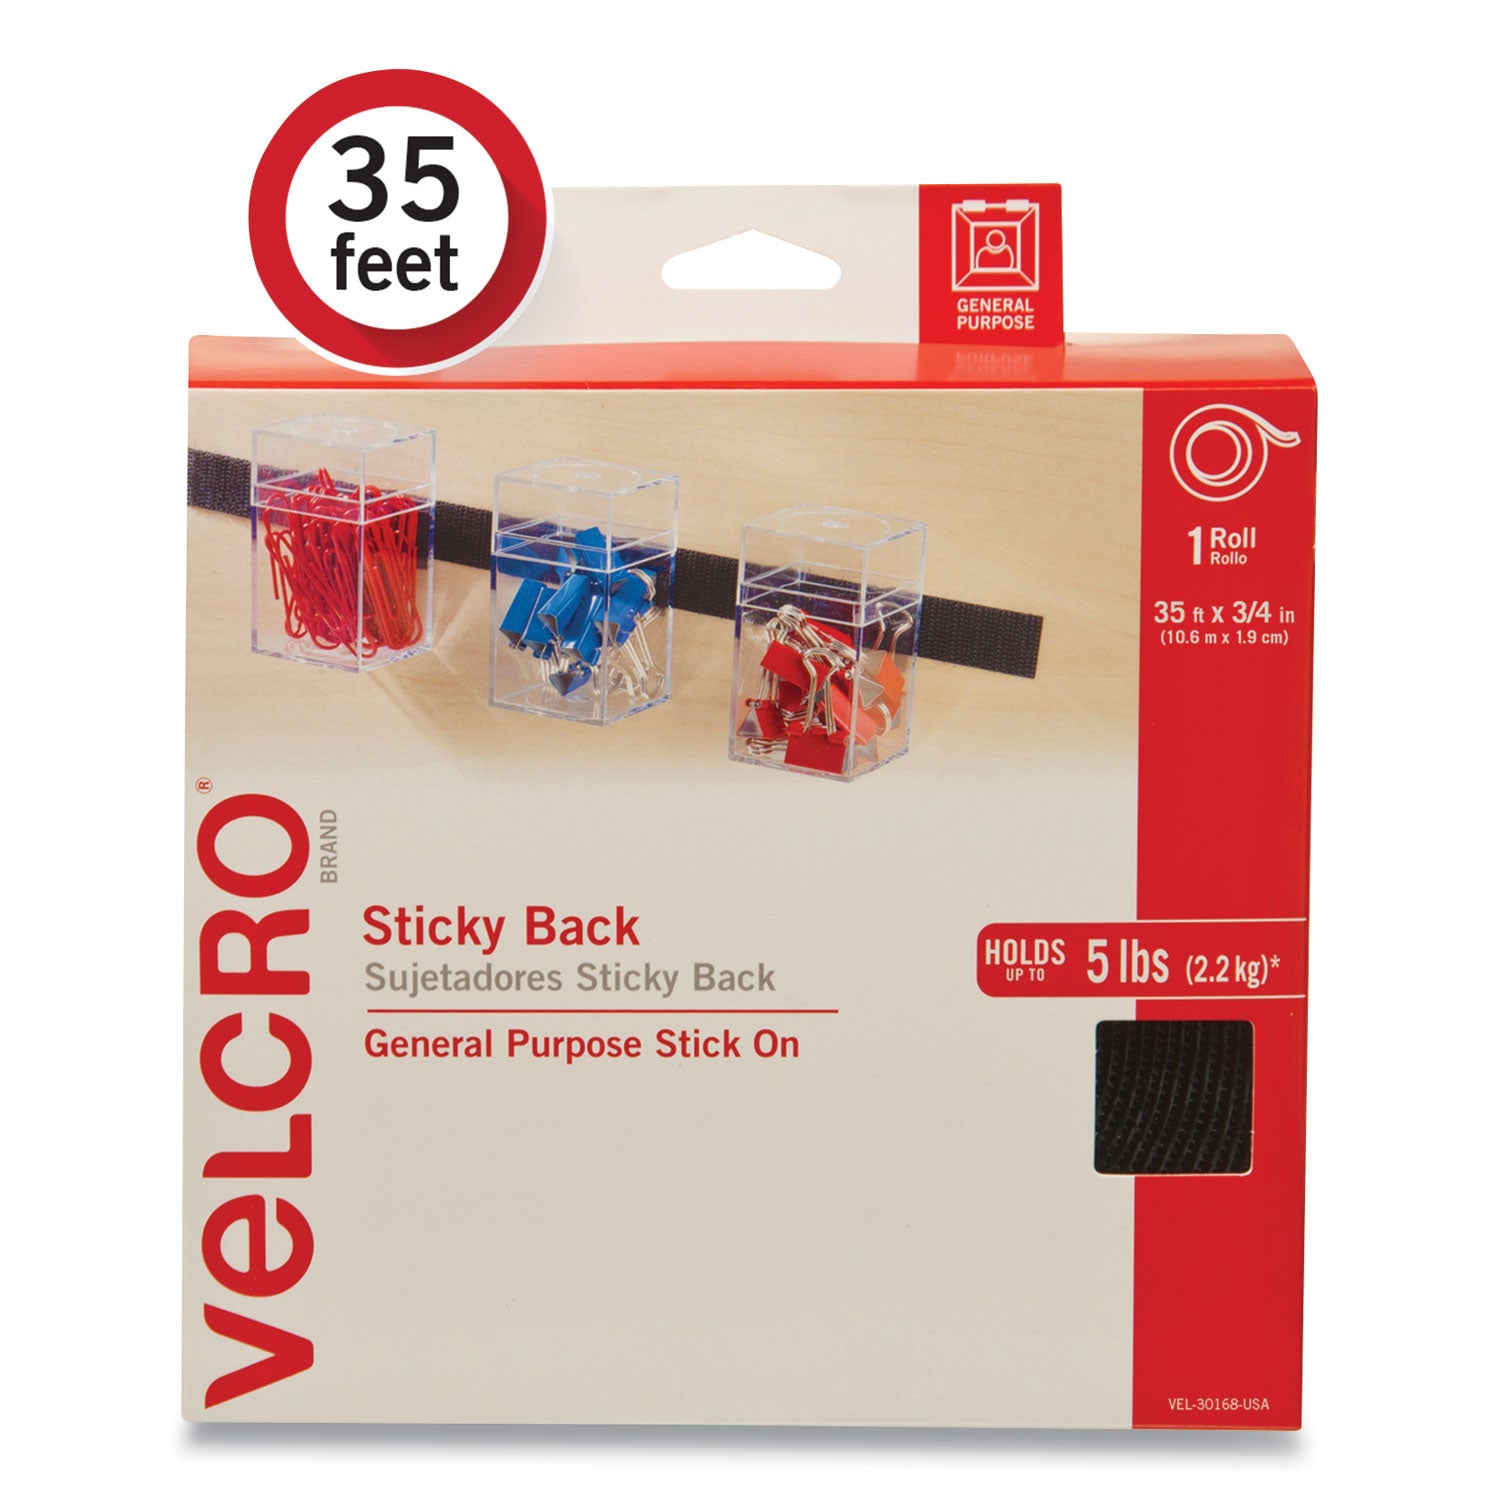 sticky-back-fasteners-removable-adhesive-075-x-35-ft-black_vek30168usa - 1